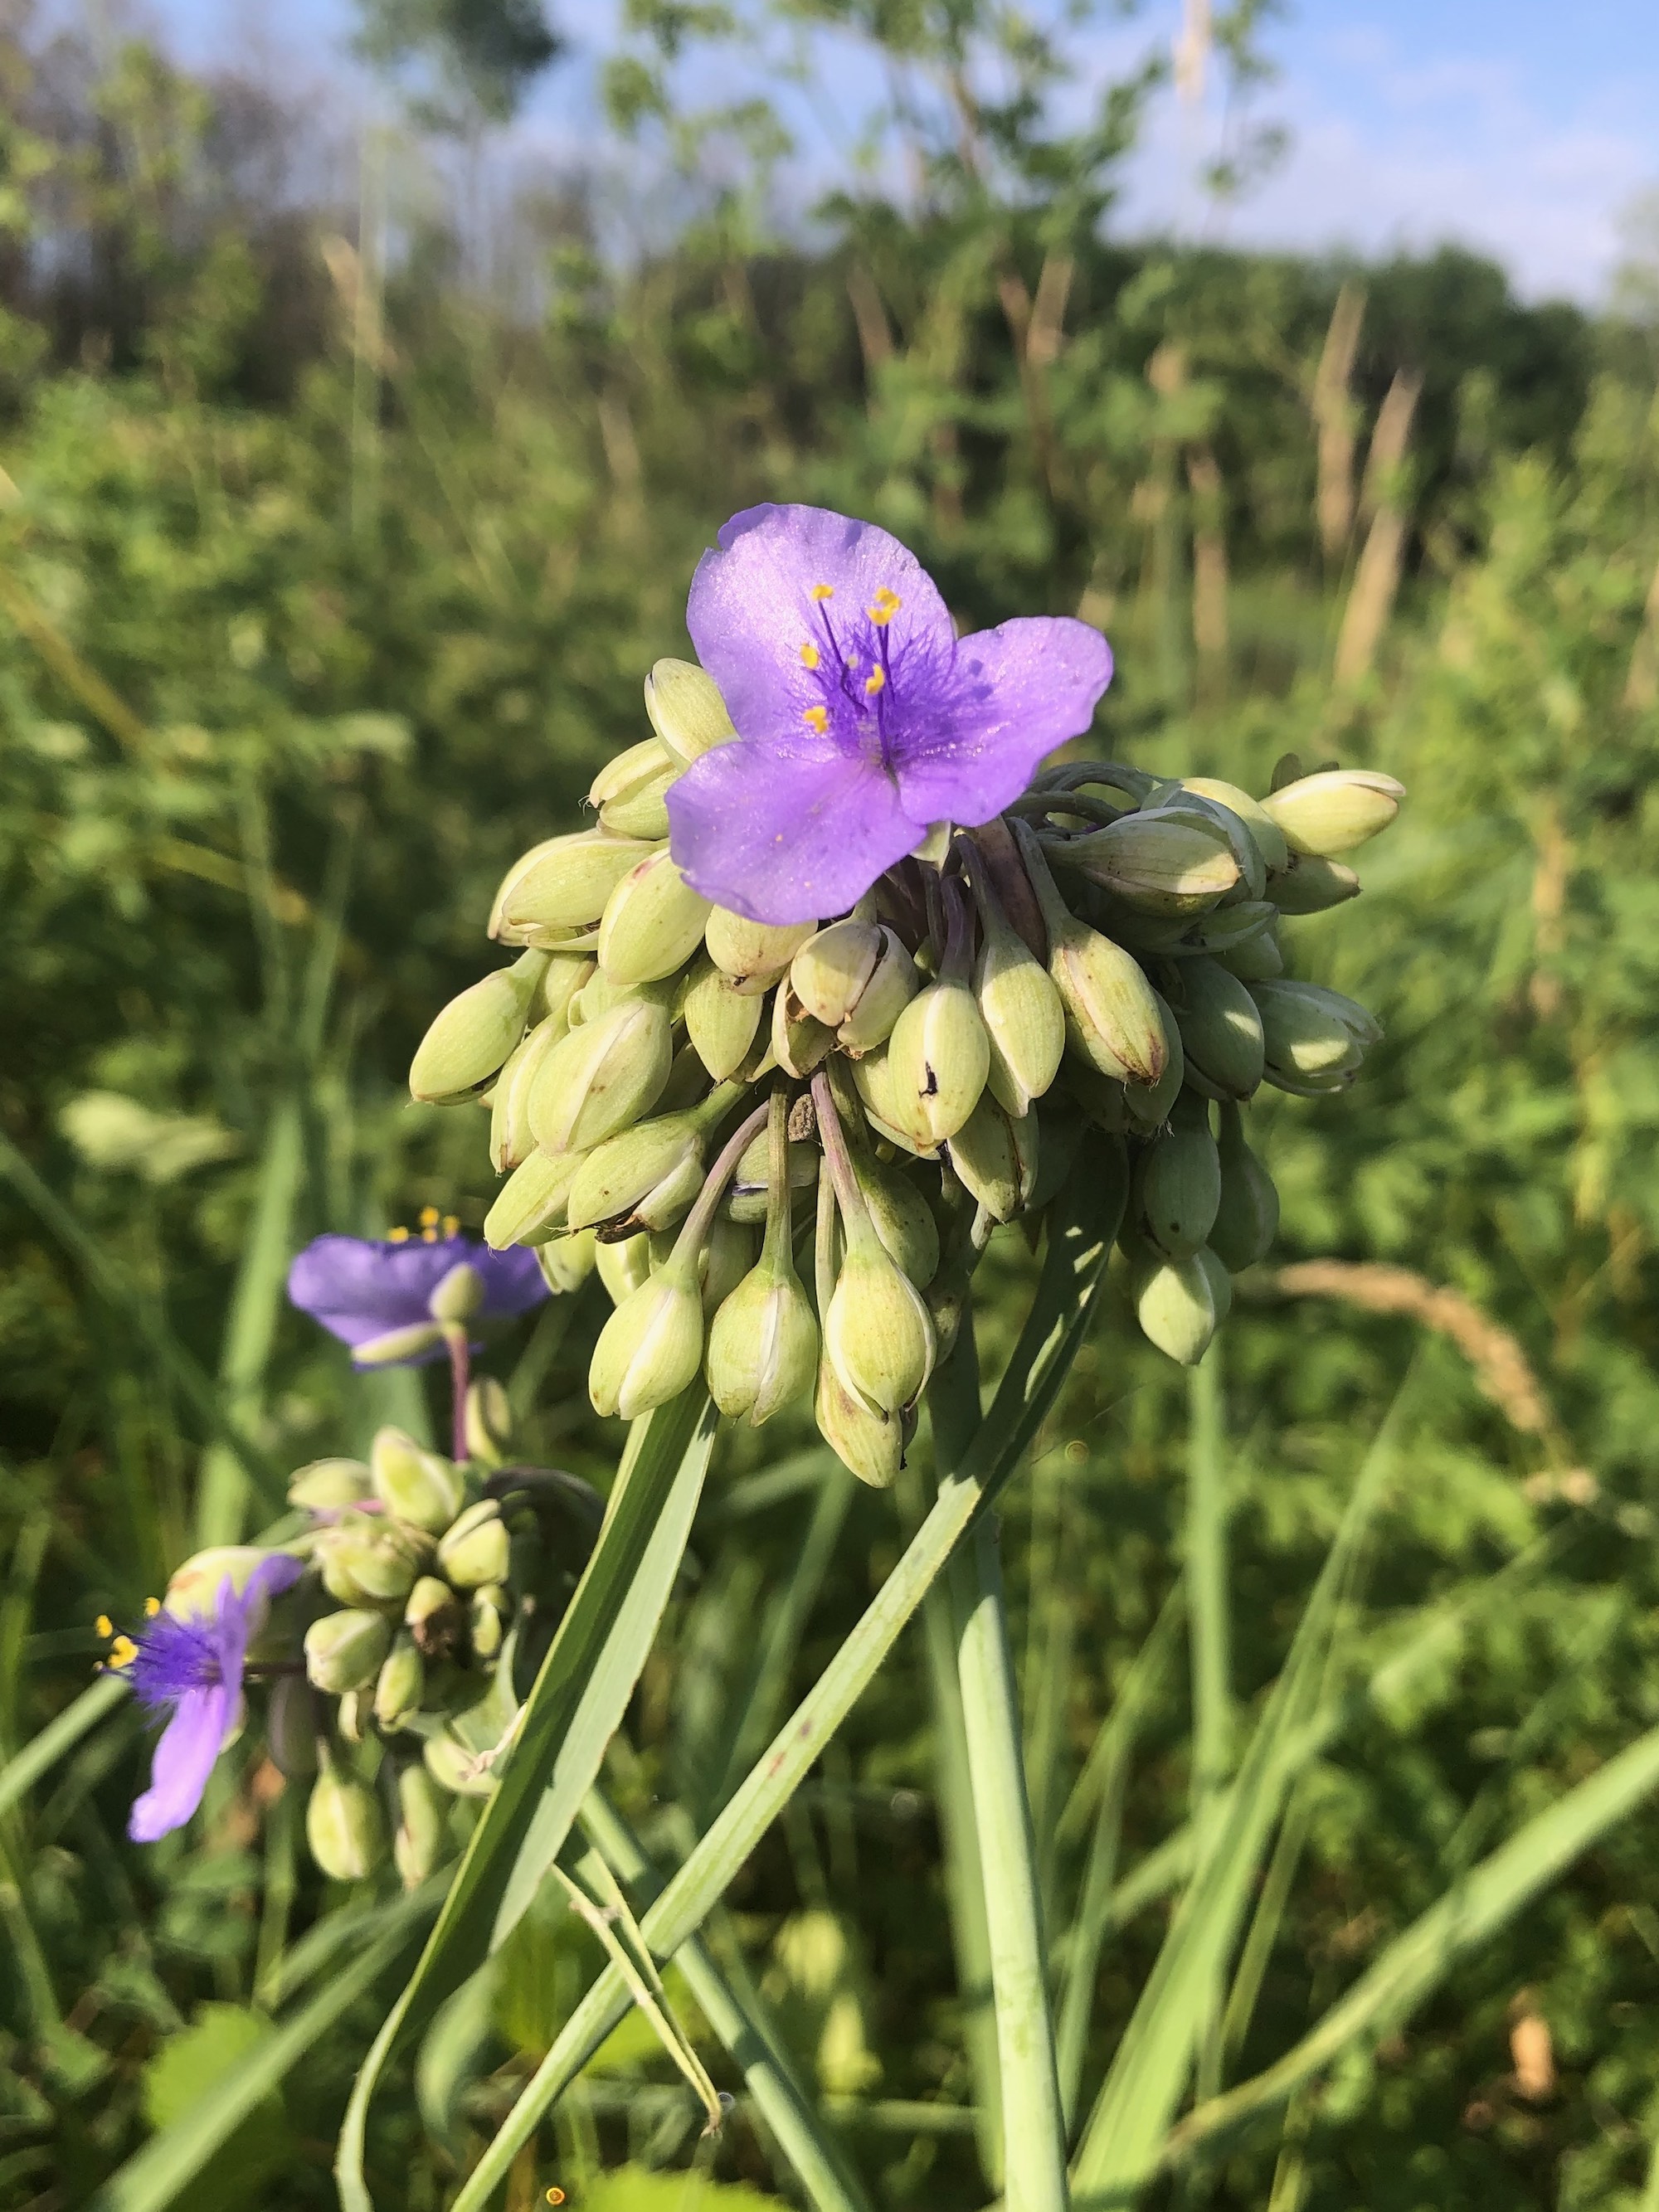 Spiderwort on bank of Marion Dunn Pond on July 6, 2020.